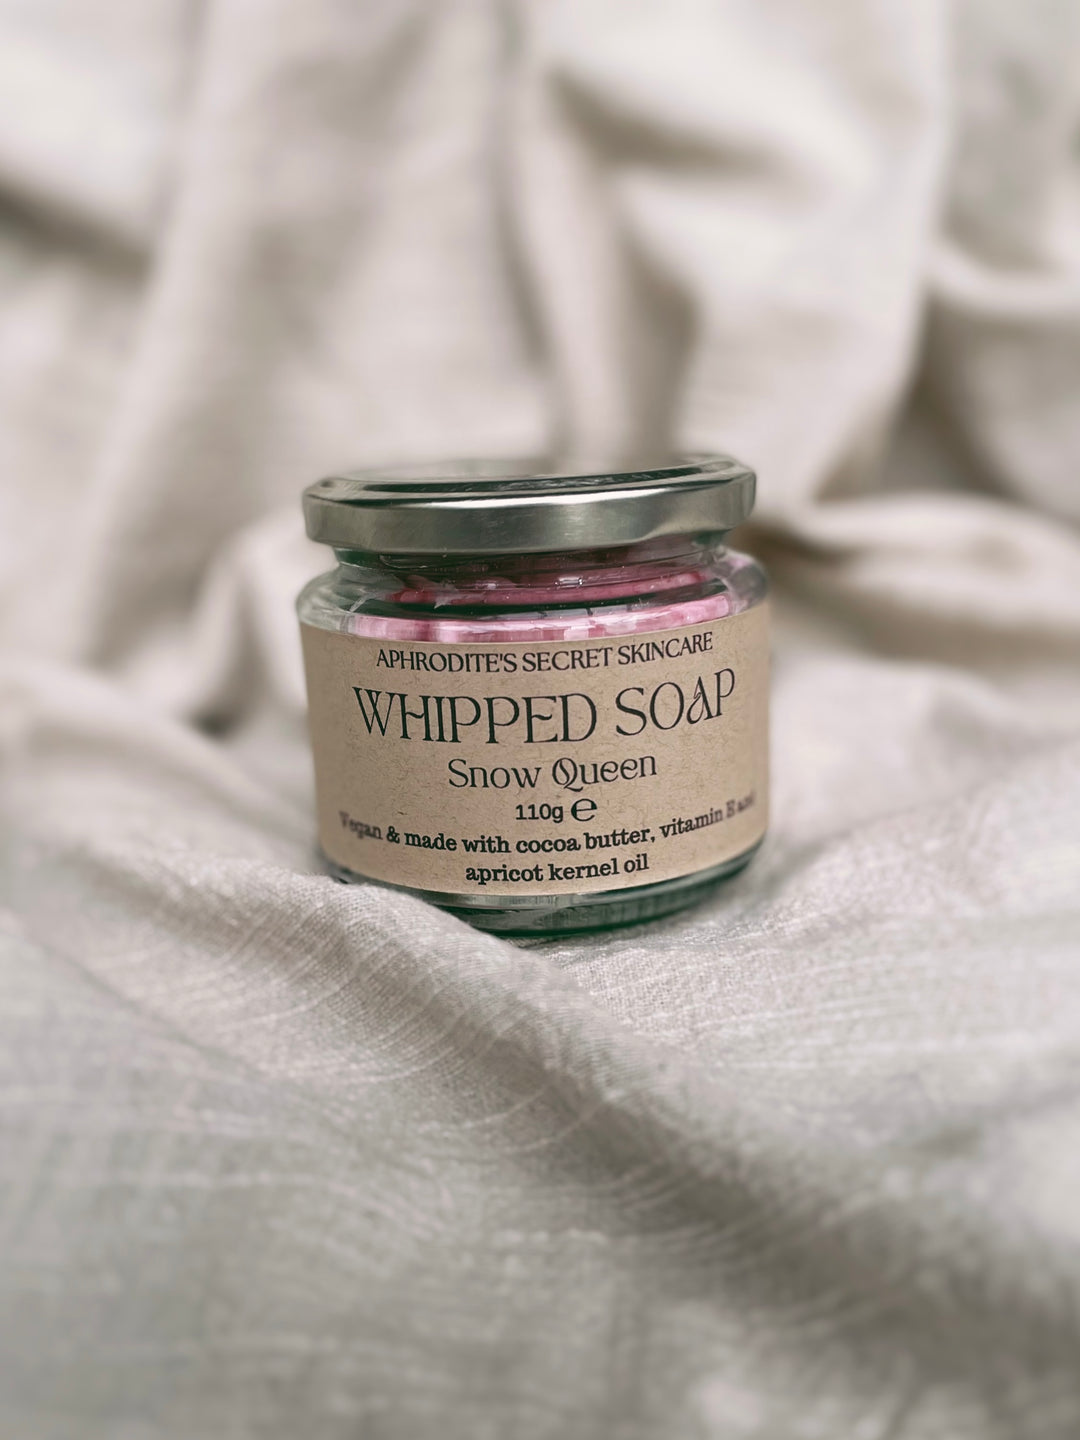 Snow Queen Whipped Soap